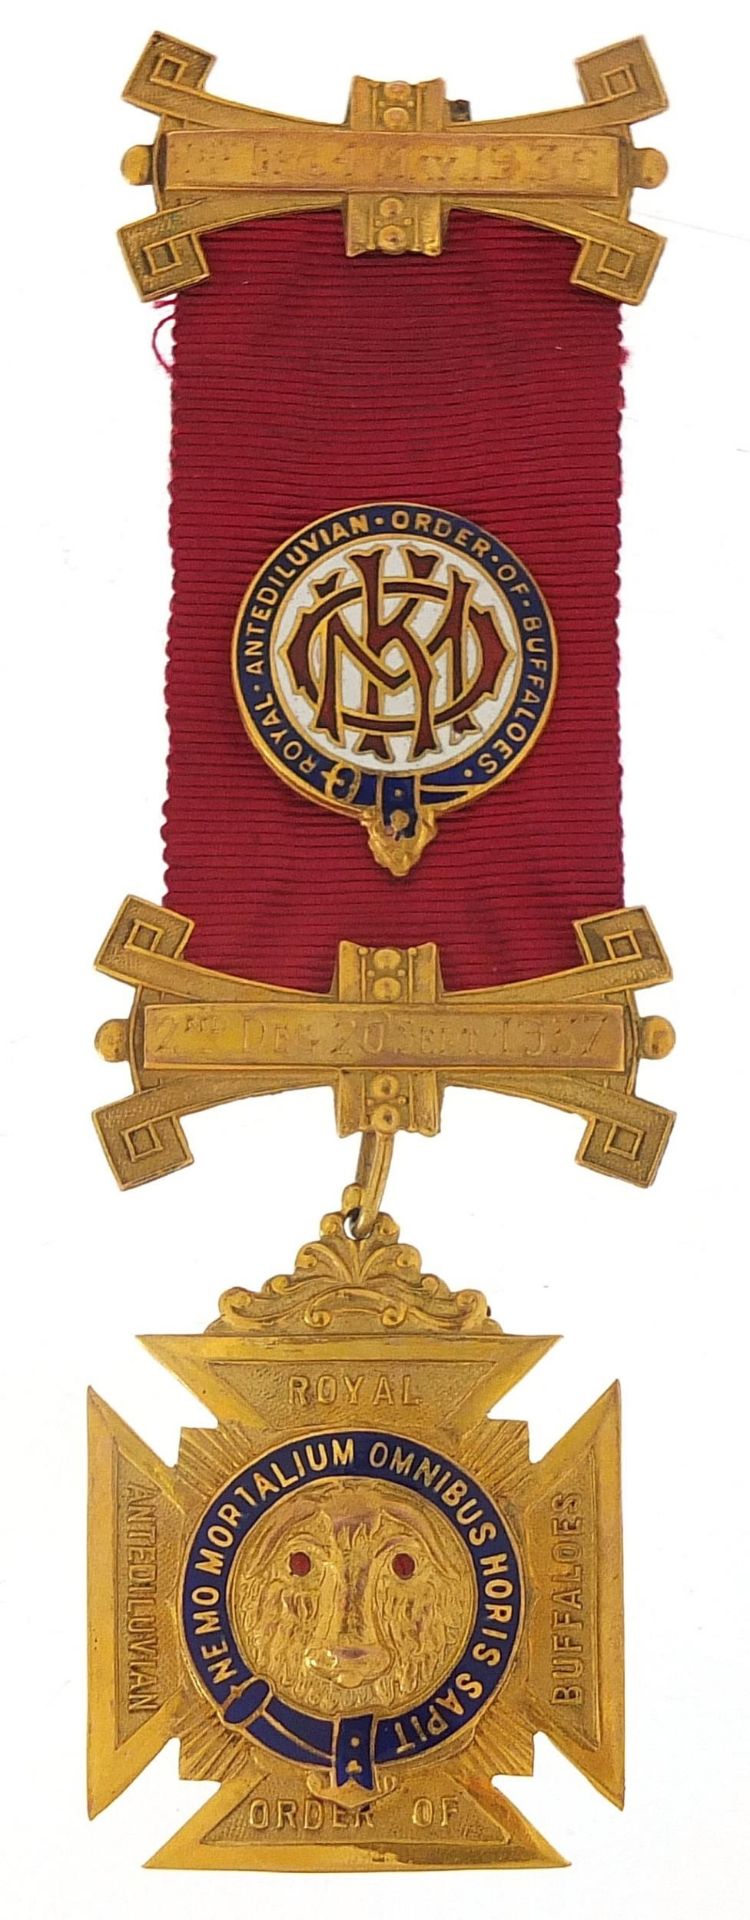 9ct gold and enamel RAOB medal with silk ribbon and bars, awarded to Bro Sidney Russell, C.P by - Image 2 of 5